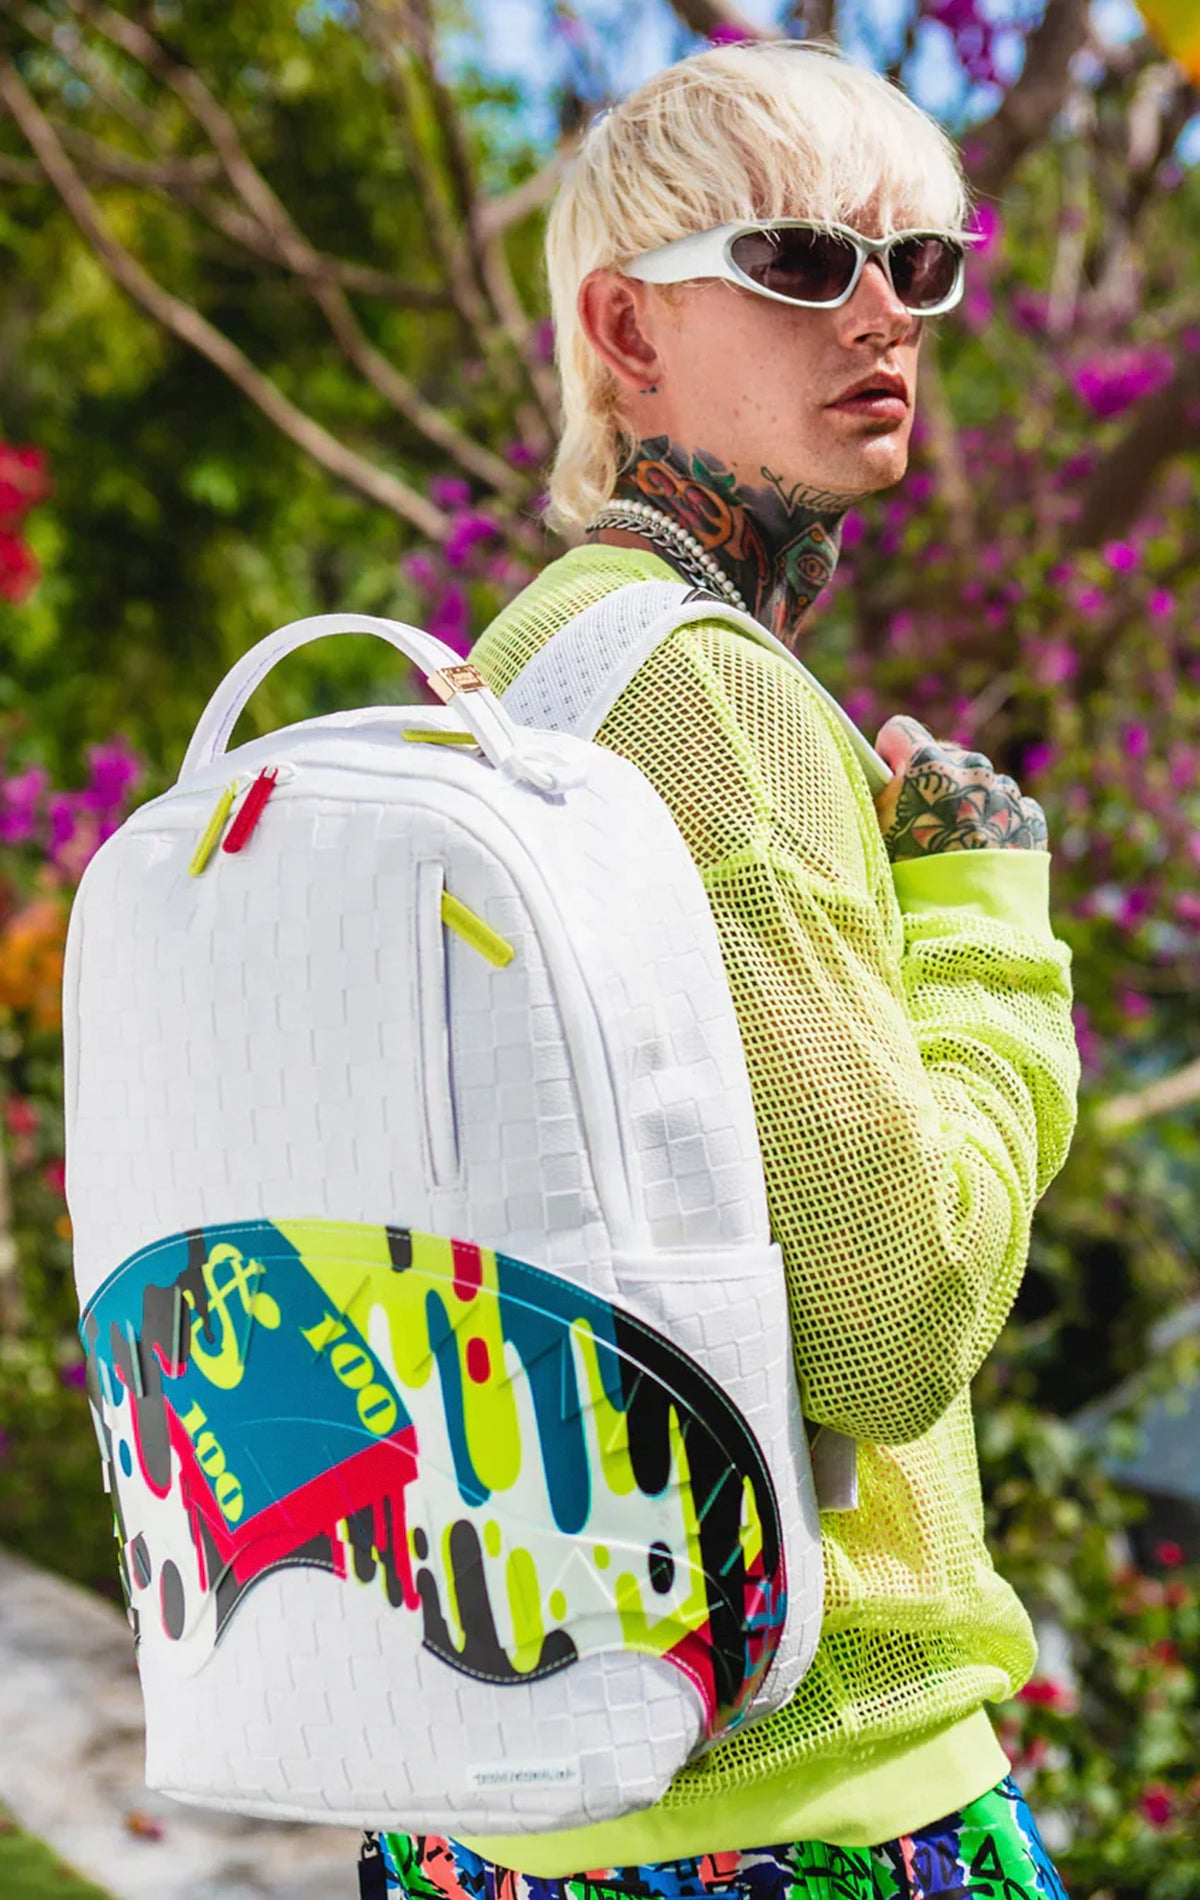 Cool white Sprayground backpack featuring a stylized shark graphic, with separate velour laptop & sunglass compartments, padded back, and luggage sleeve.